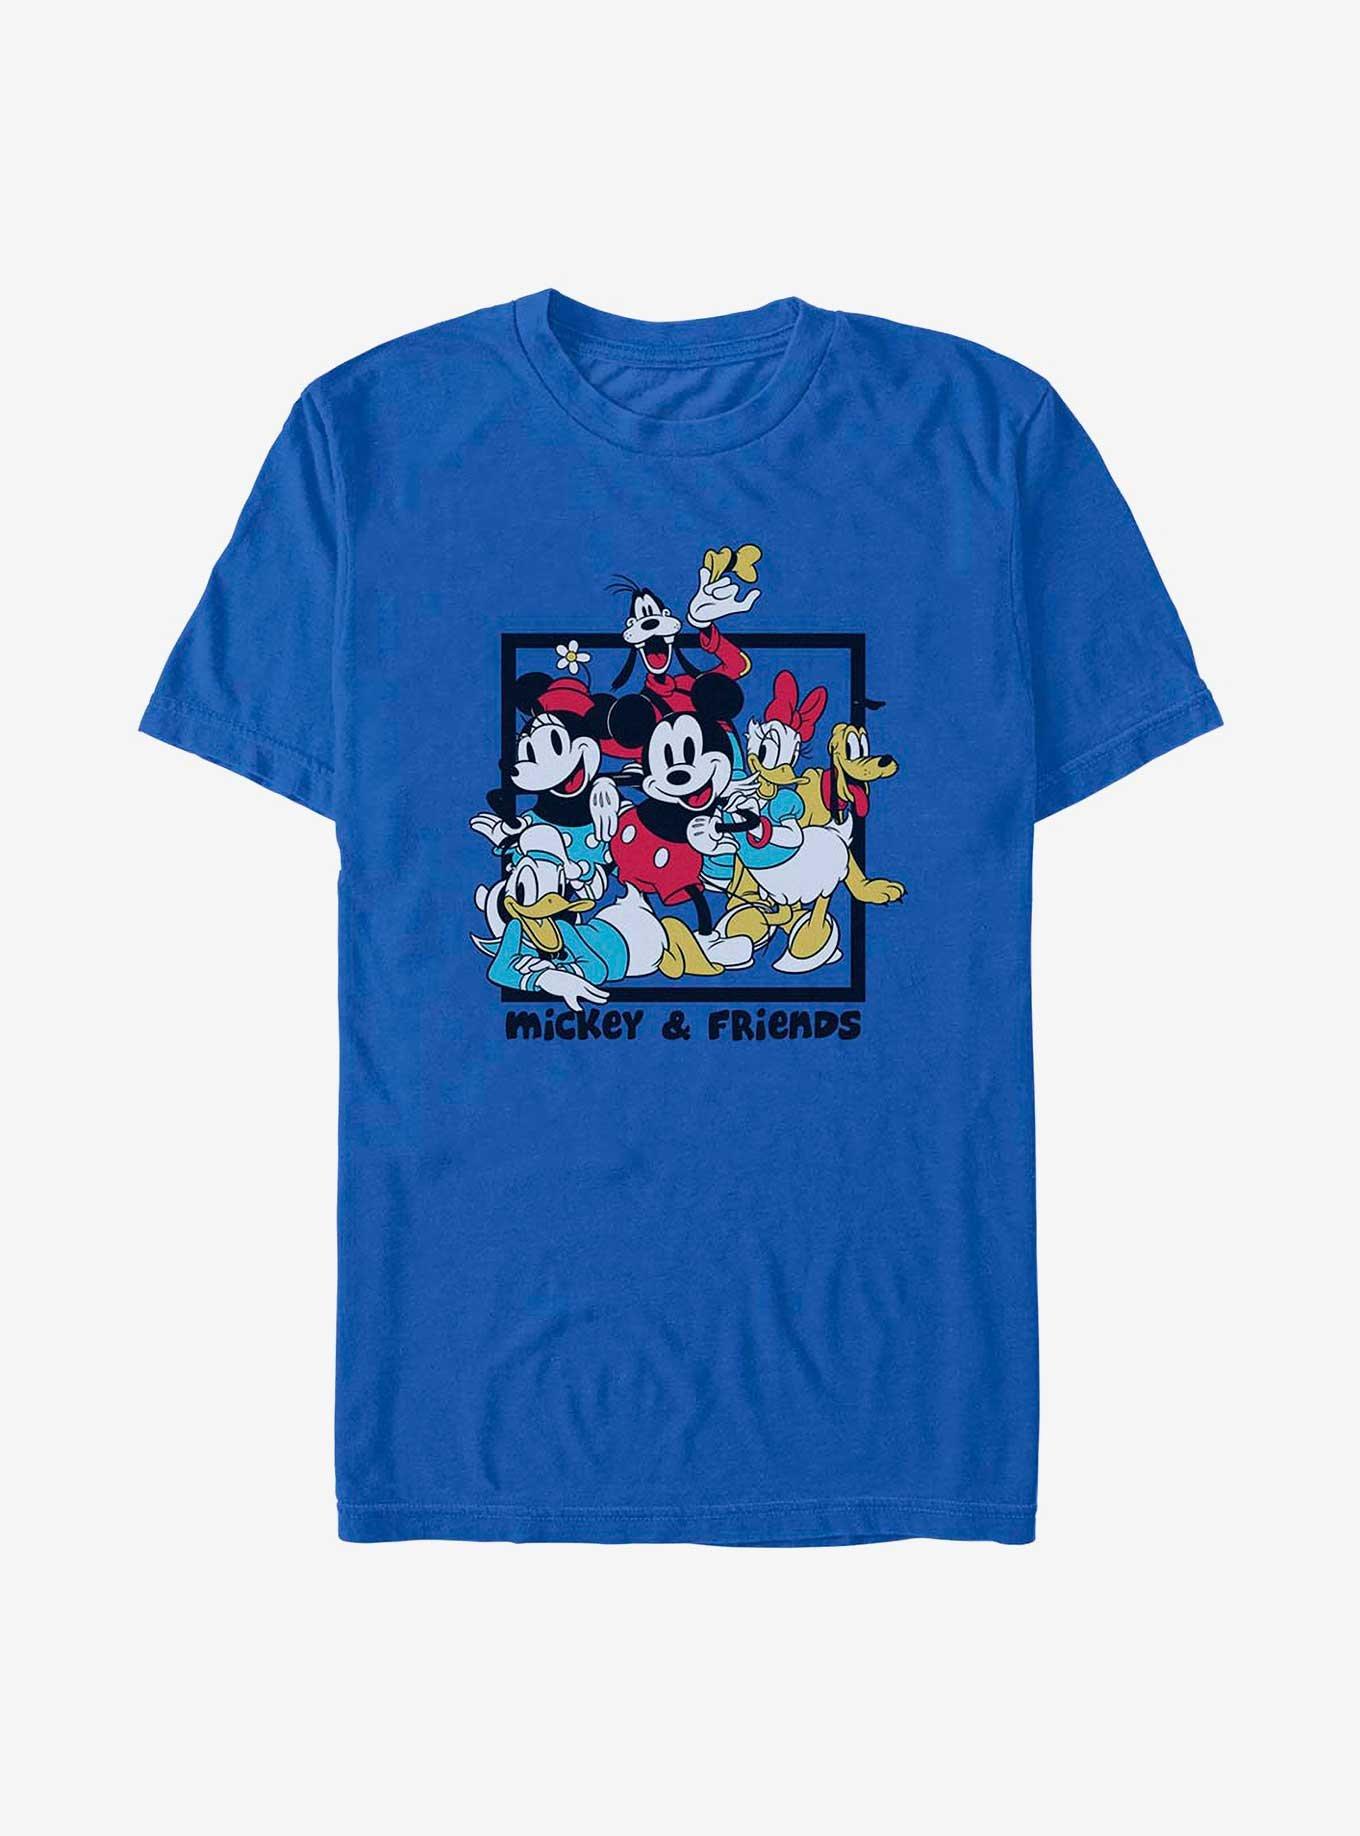 Disney Mickey Mouse & Friends Square T-Shirt - BLUE